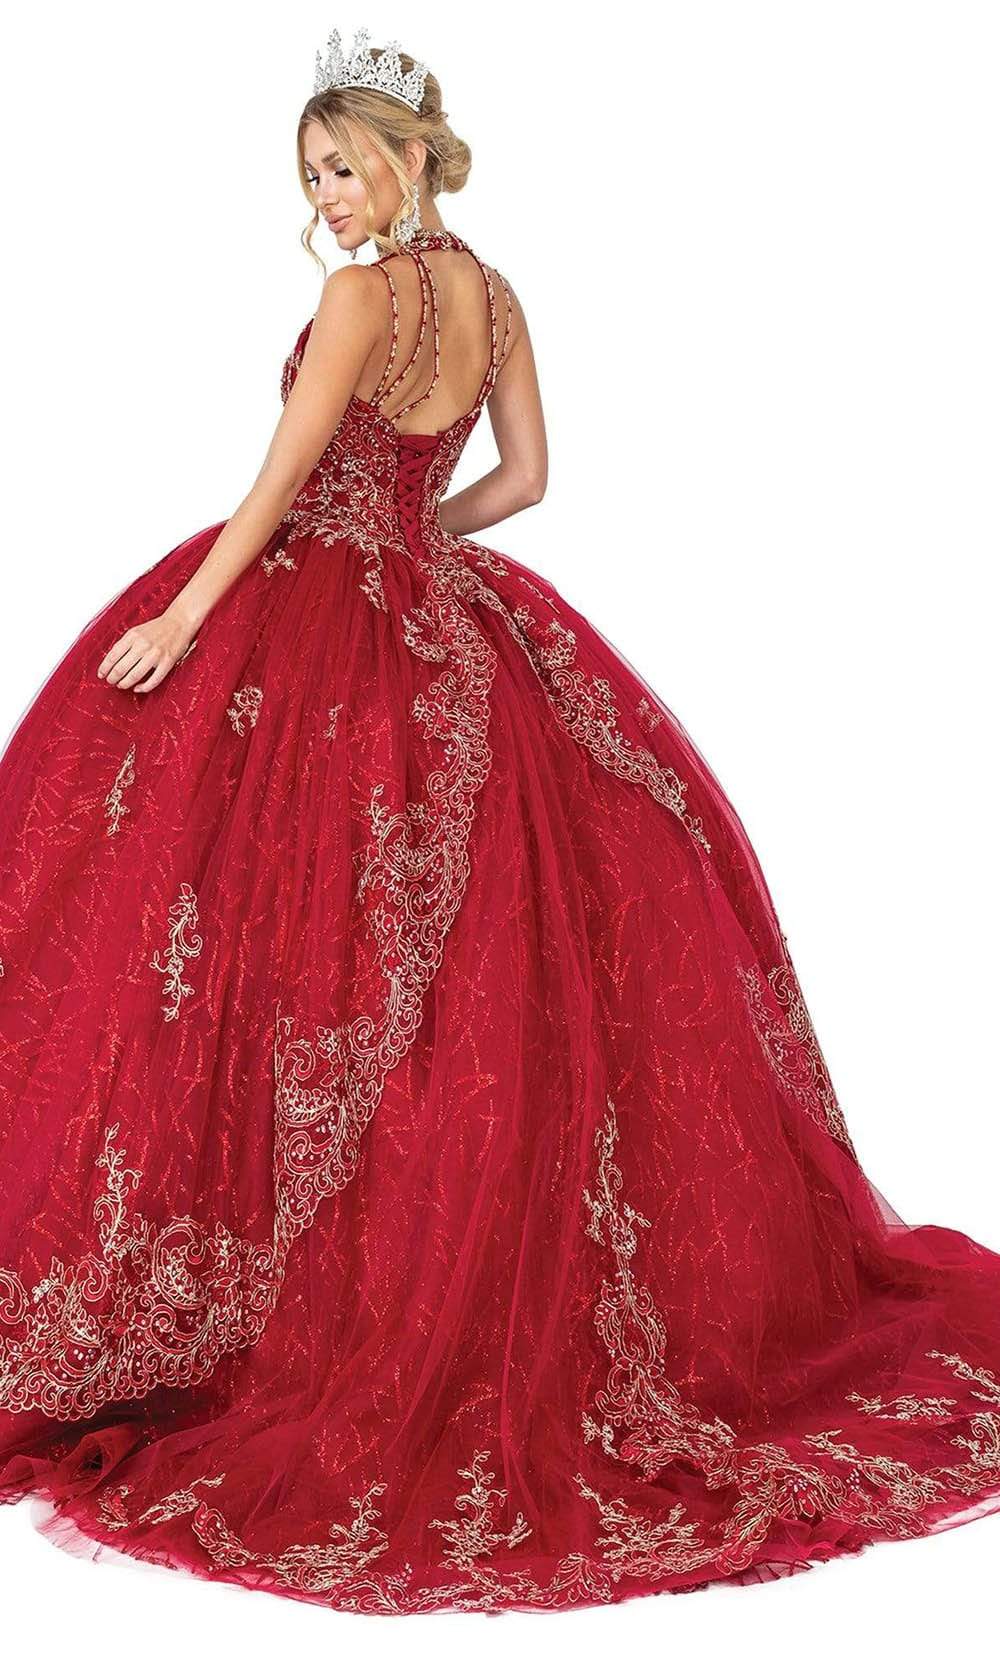 Dancing Queen - 1609 Appliqued Strappy Ballgown Special Occasion Dress